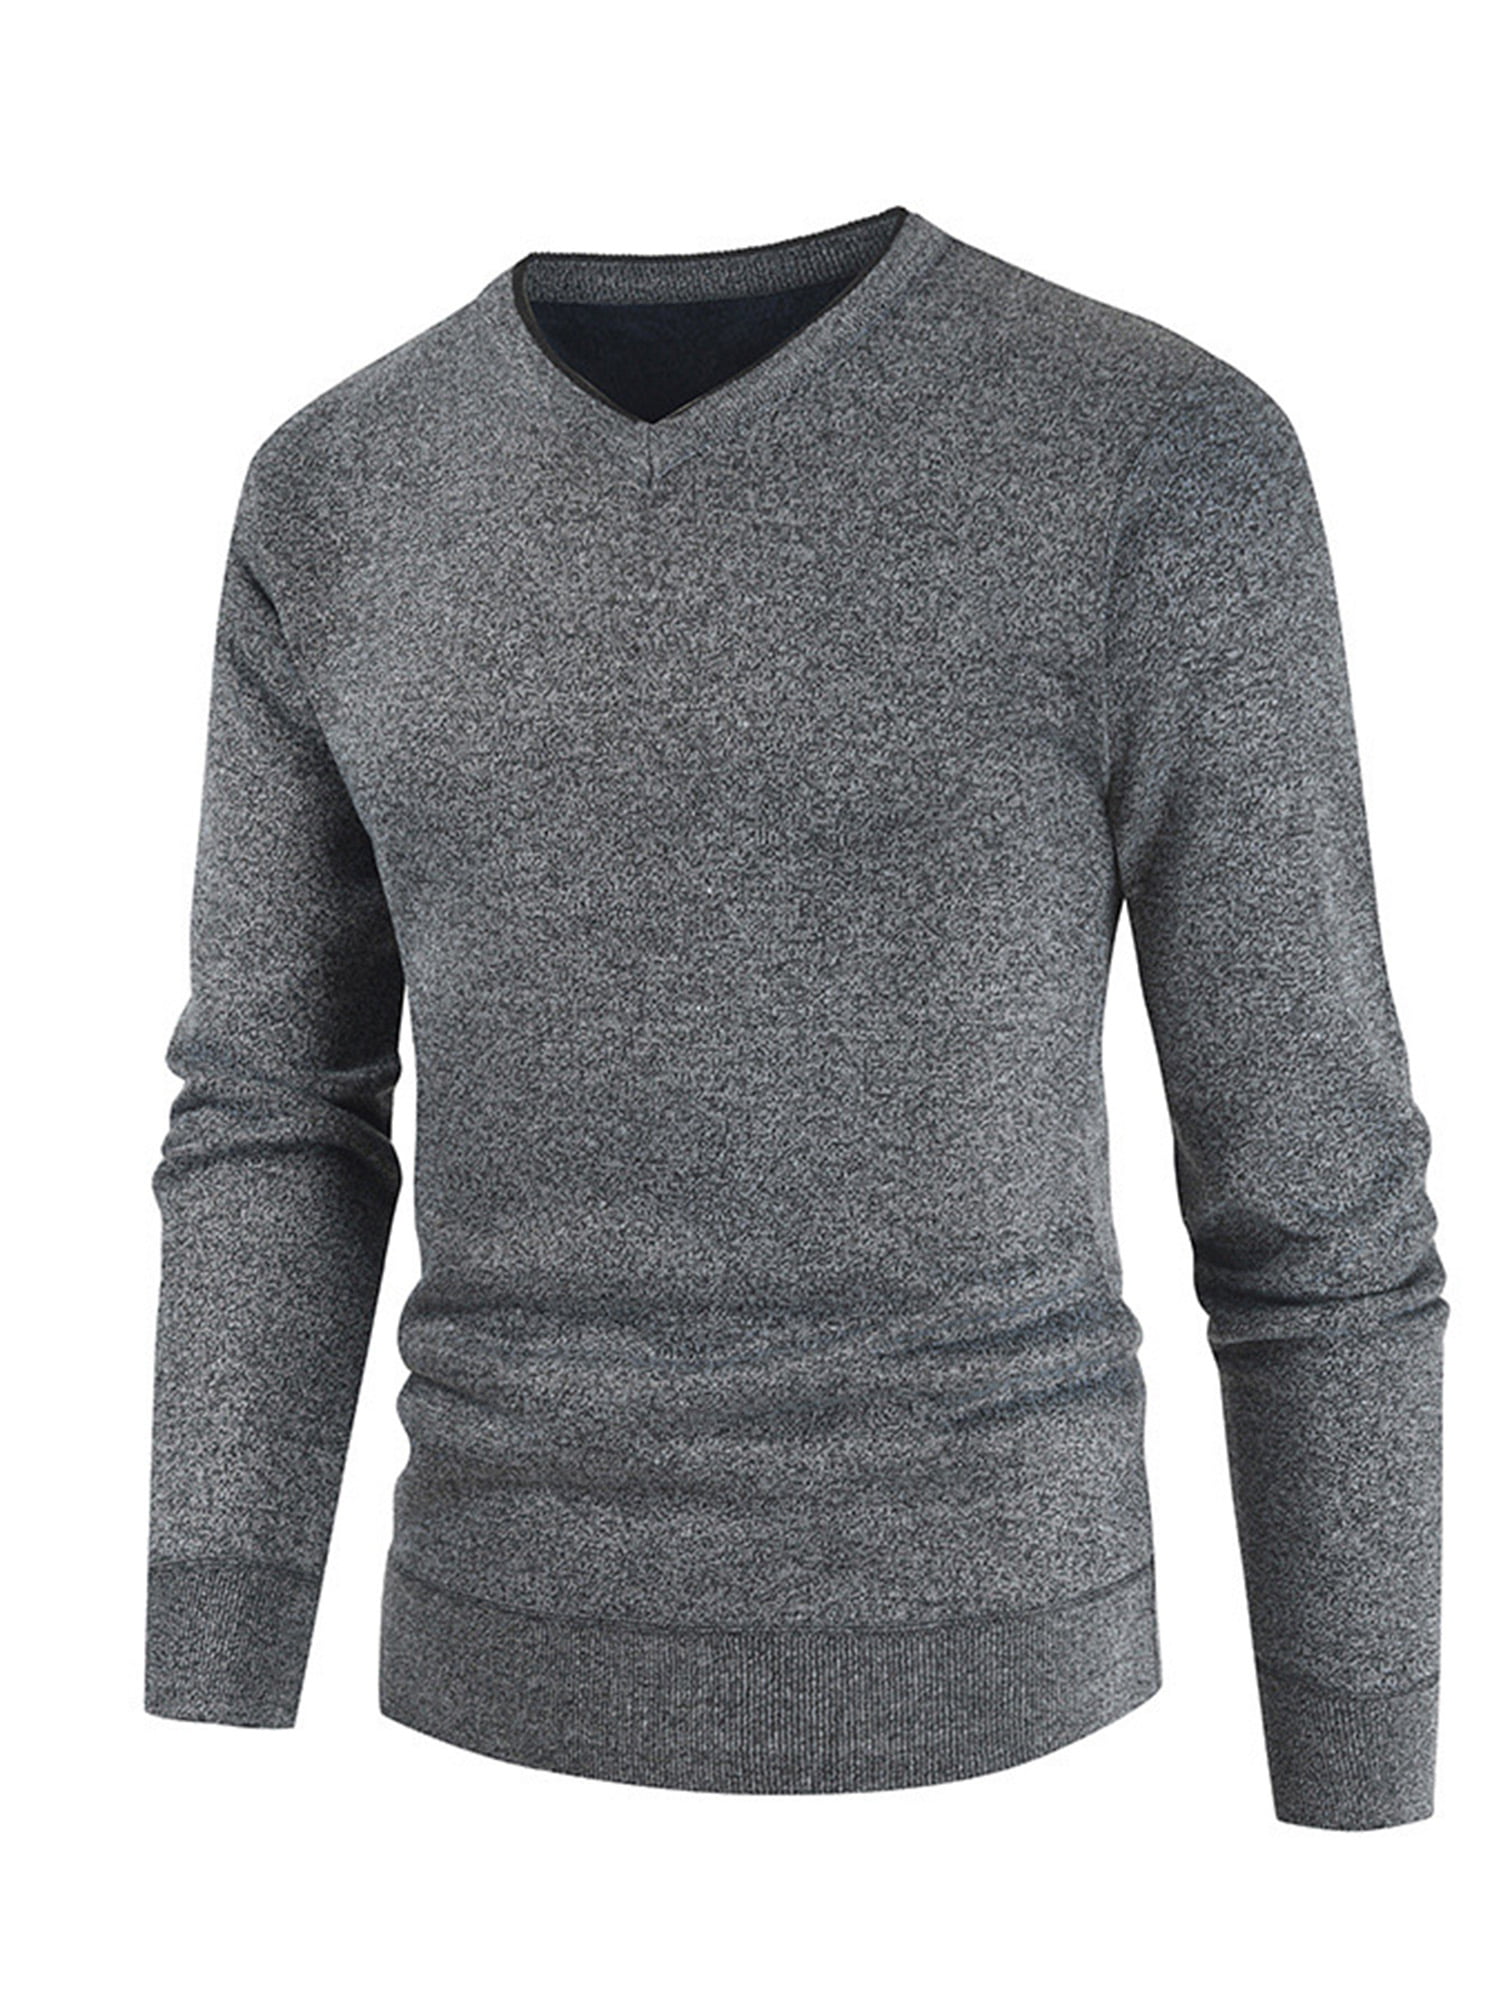 Mens Striped V Neck Jumpers Pullover Long Sleeve Knitwear Formal Business Office Casual Basic Sweater TENDY Soft Elegant Knitted Comfy FINE Knit TOP Big Size S-5XL